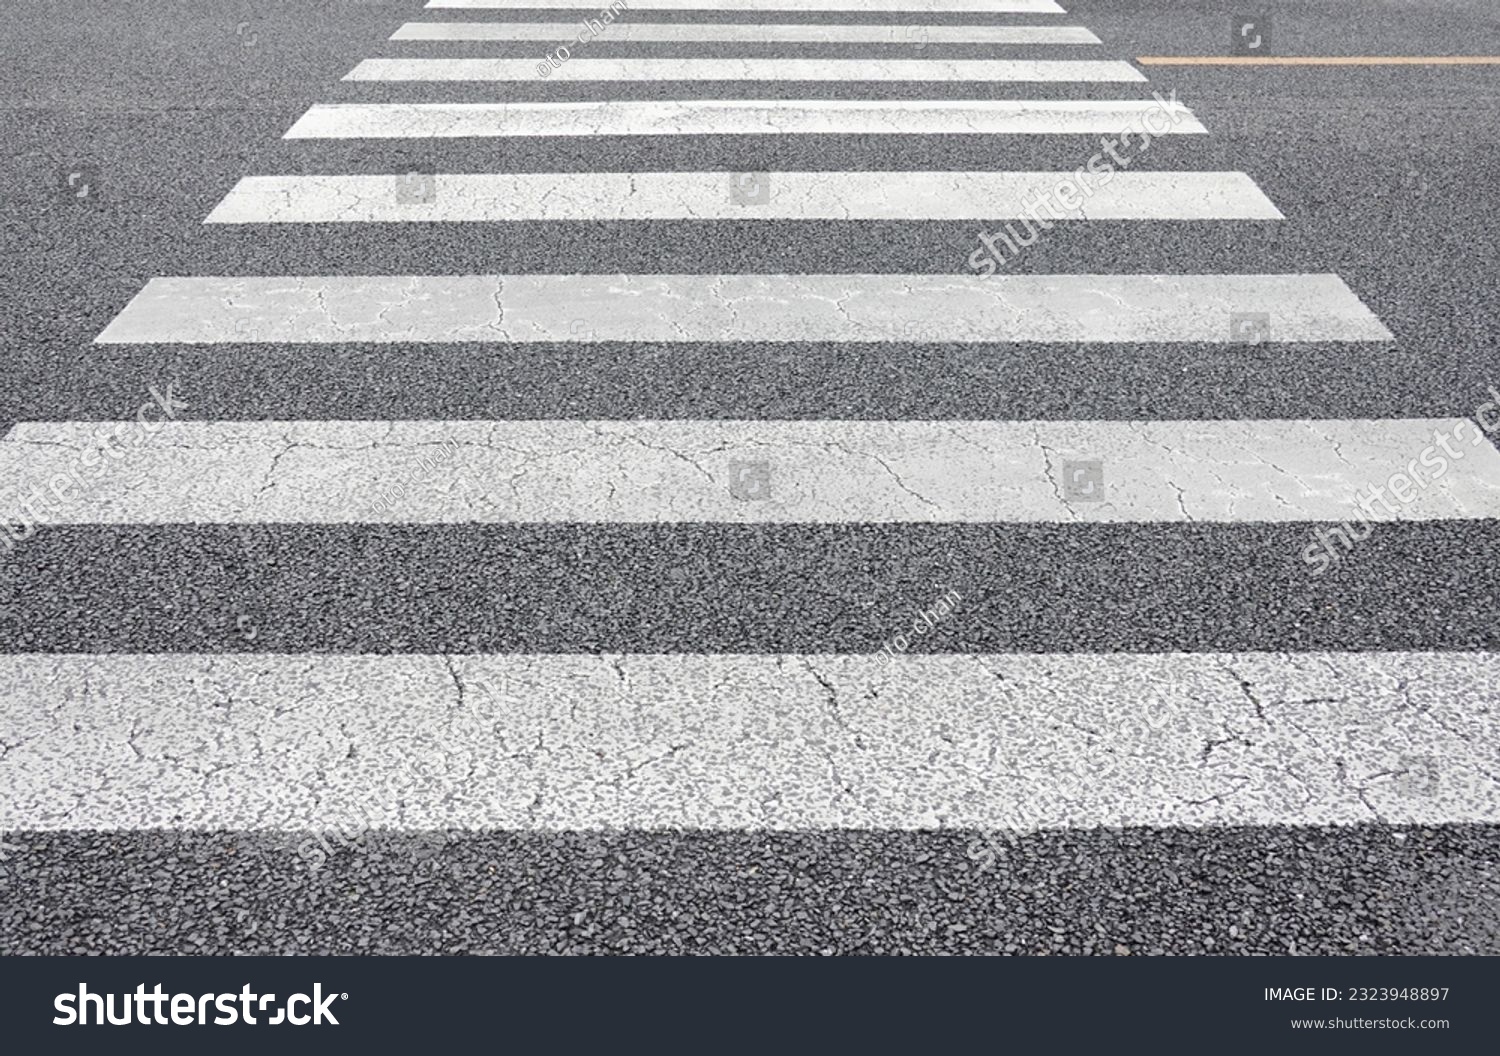  Ordinary crosswalks in Japan from the perspective of pedestrians                               #2323948897